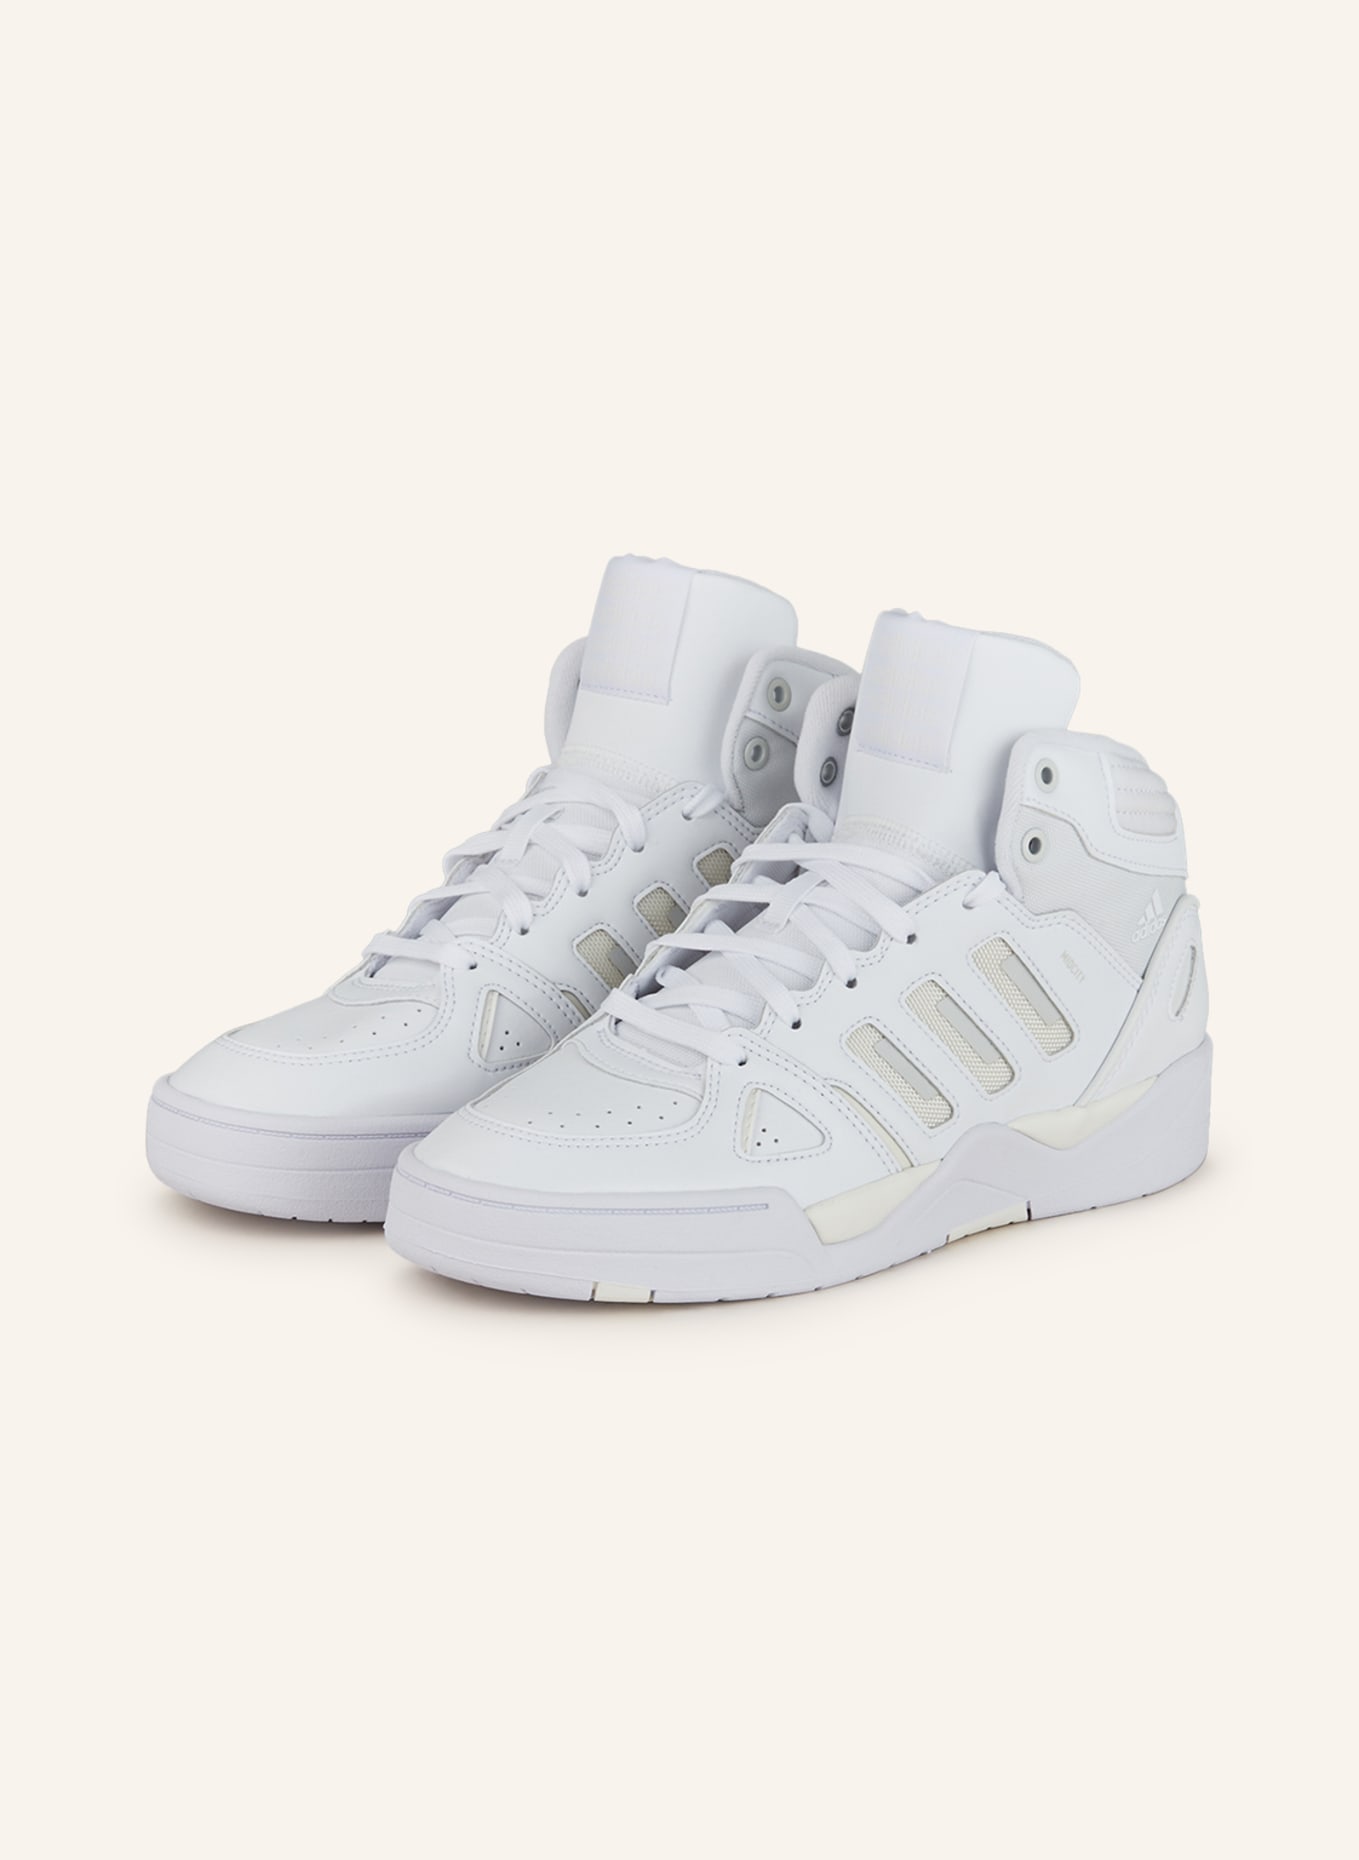 Forum 84 high-top sneakers in white - Adidas | Mytheresa